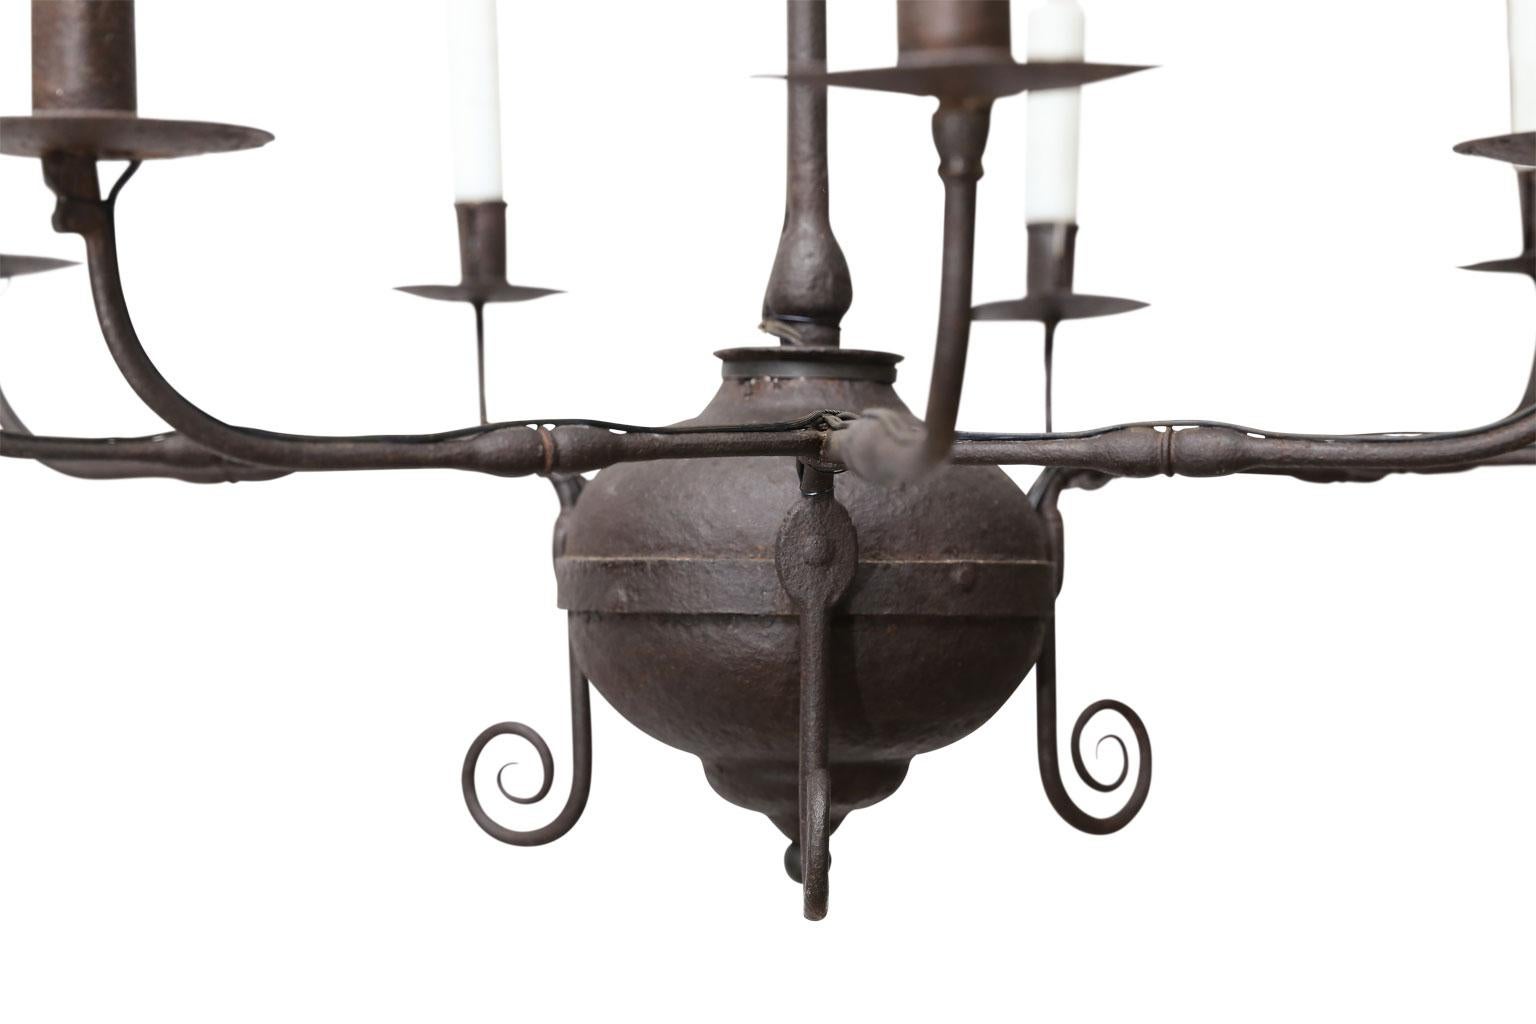 18th century American chandelier with nine arms. All hand forged and riveted iron - no welds. Extremely nice brownish-charcoal gray patina. Minor modifications to accommodate new electrical wiring for light. Newly wired for use within the USA.